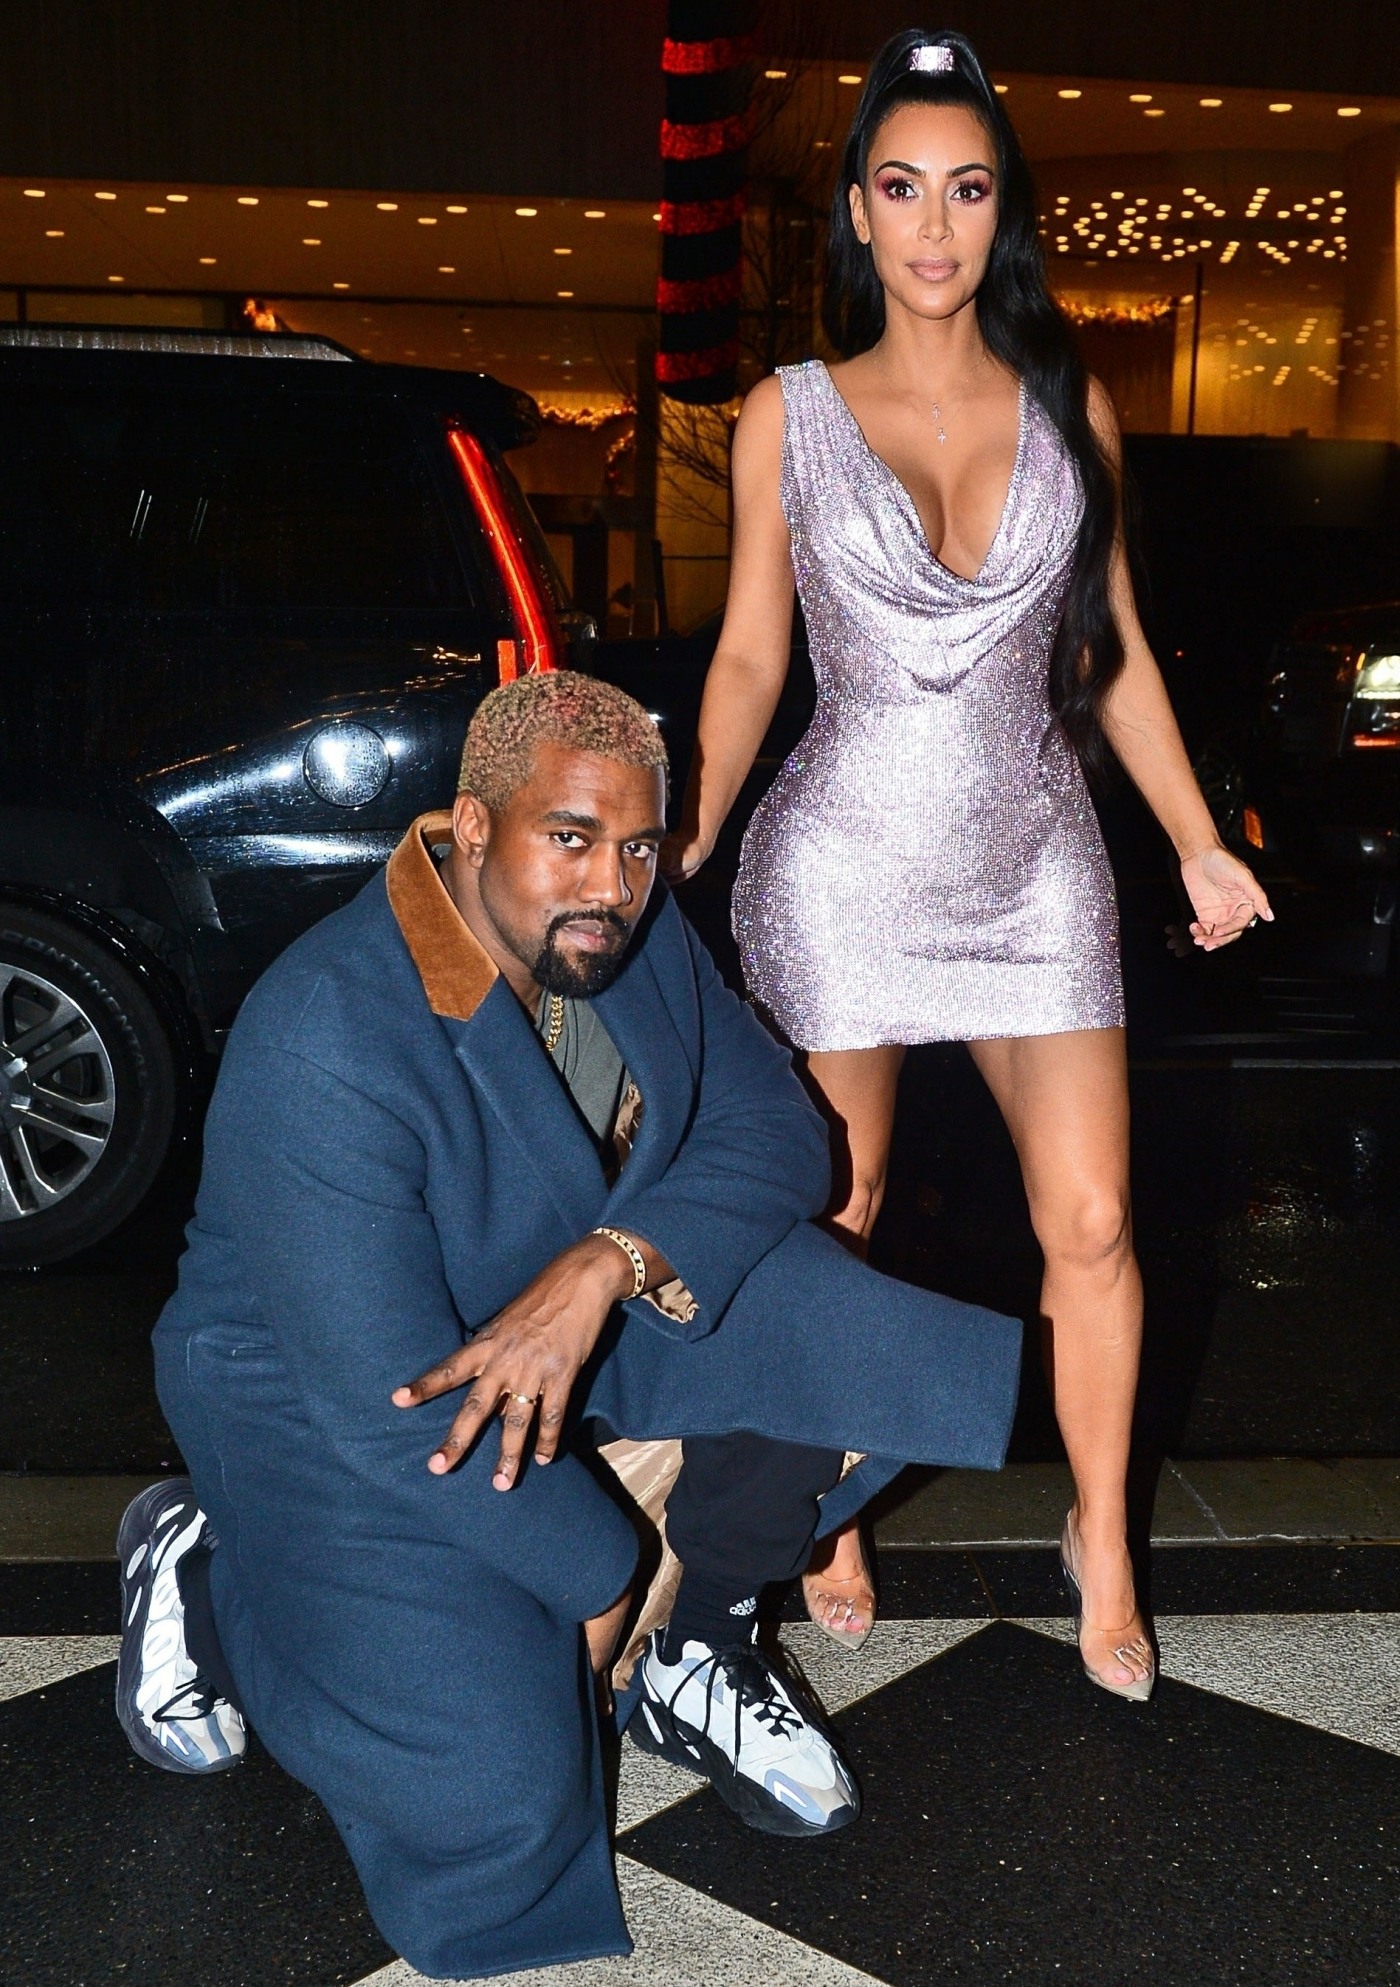 Kim Kardashian and Kanye West strike a pose in front of their NYC hotel